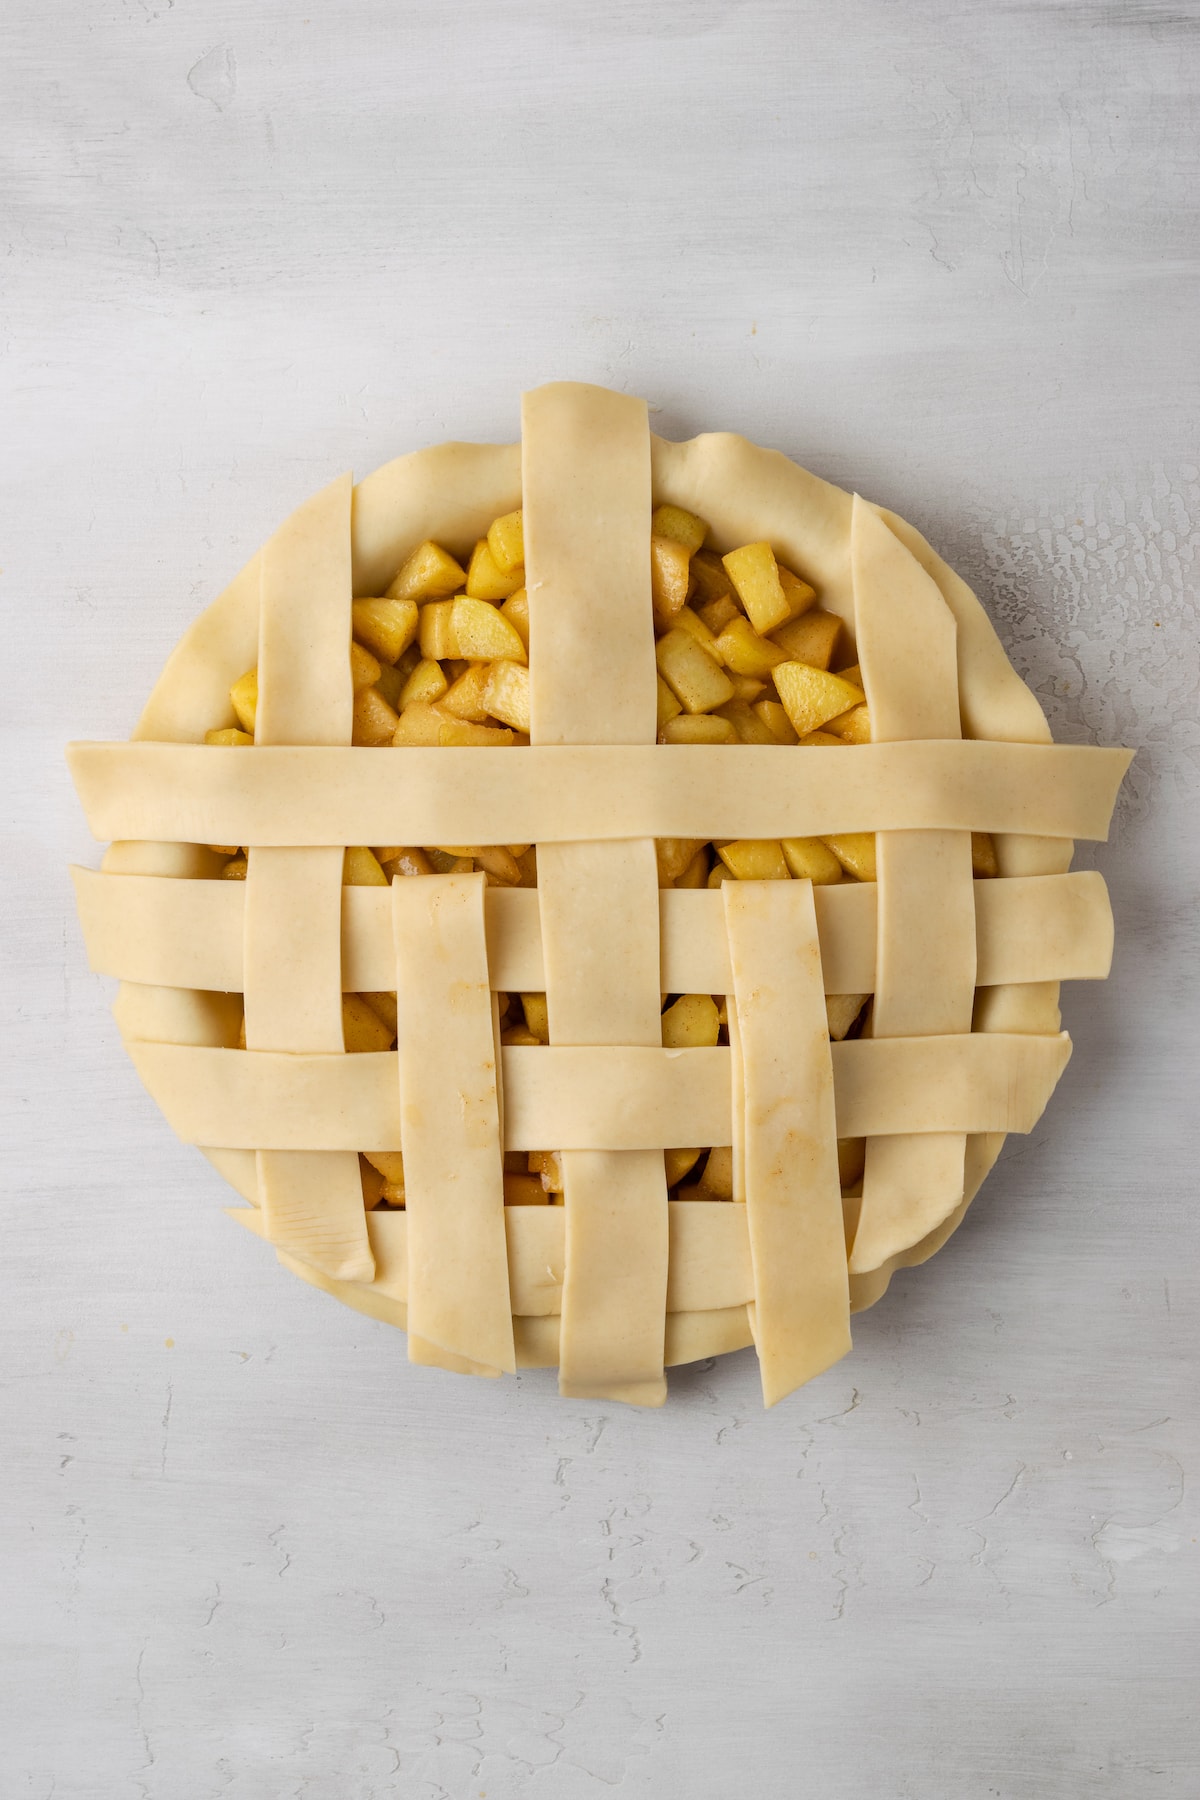 An apple pie with a partially completed lattice top.